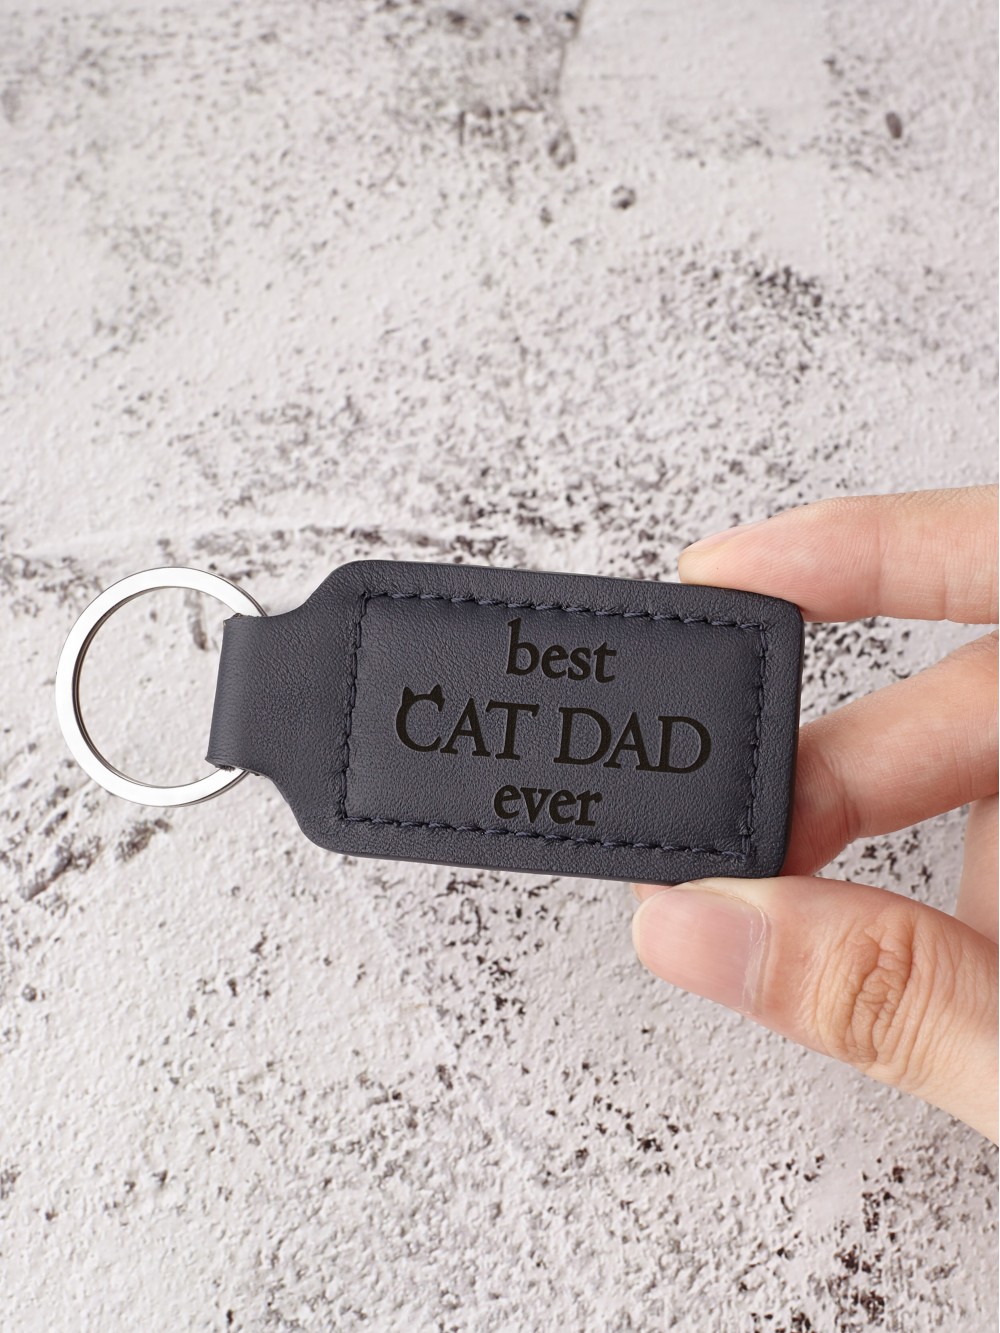 Personalized Keychain For Pet Dad